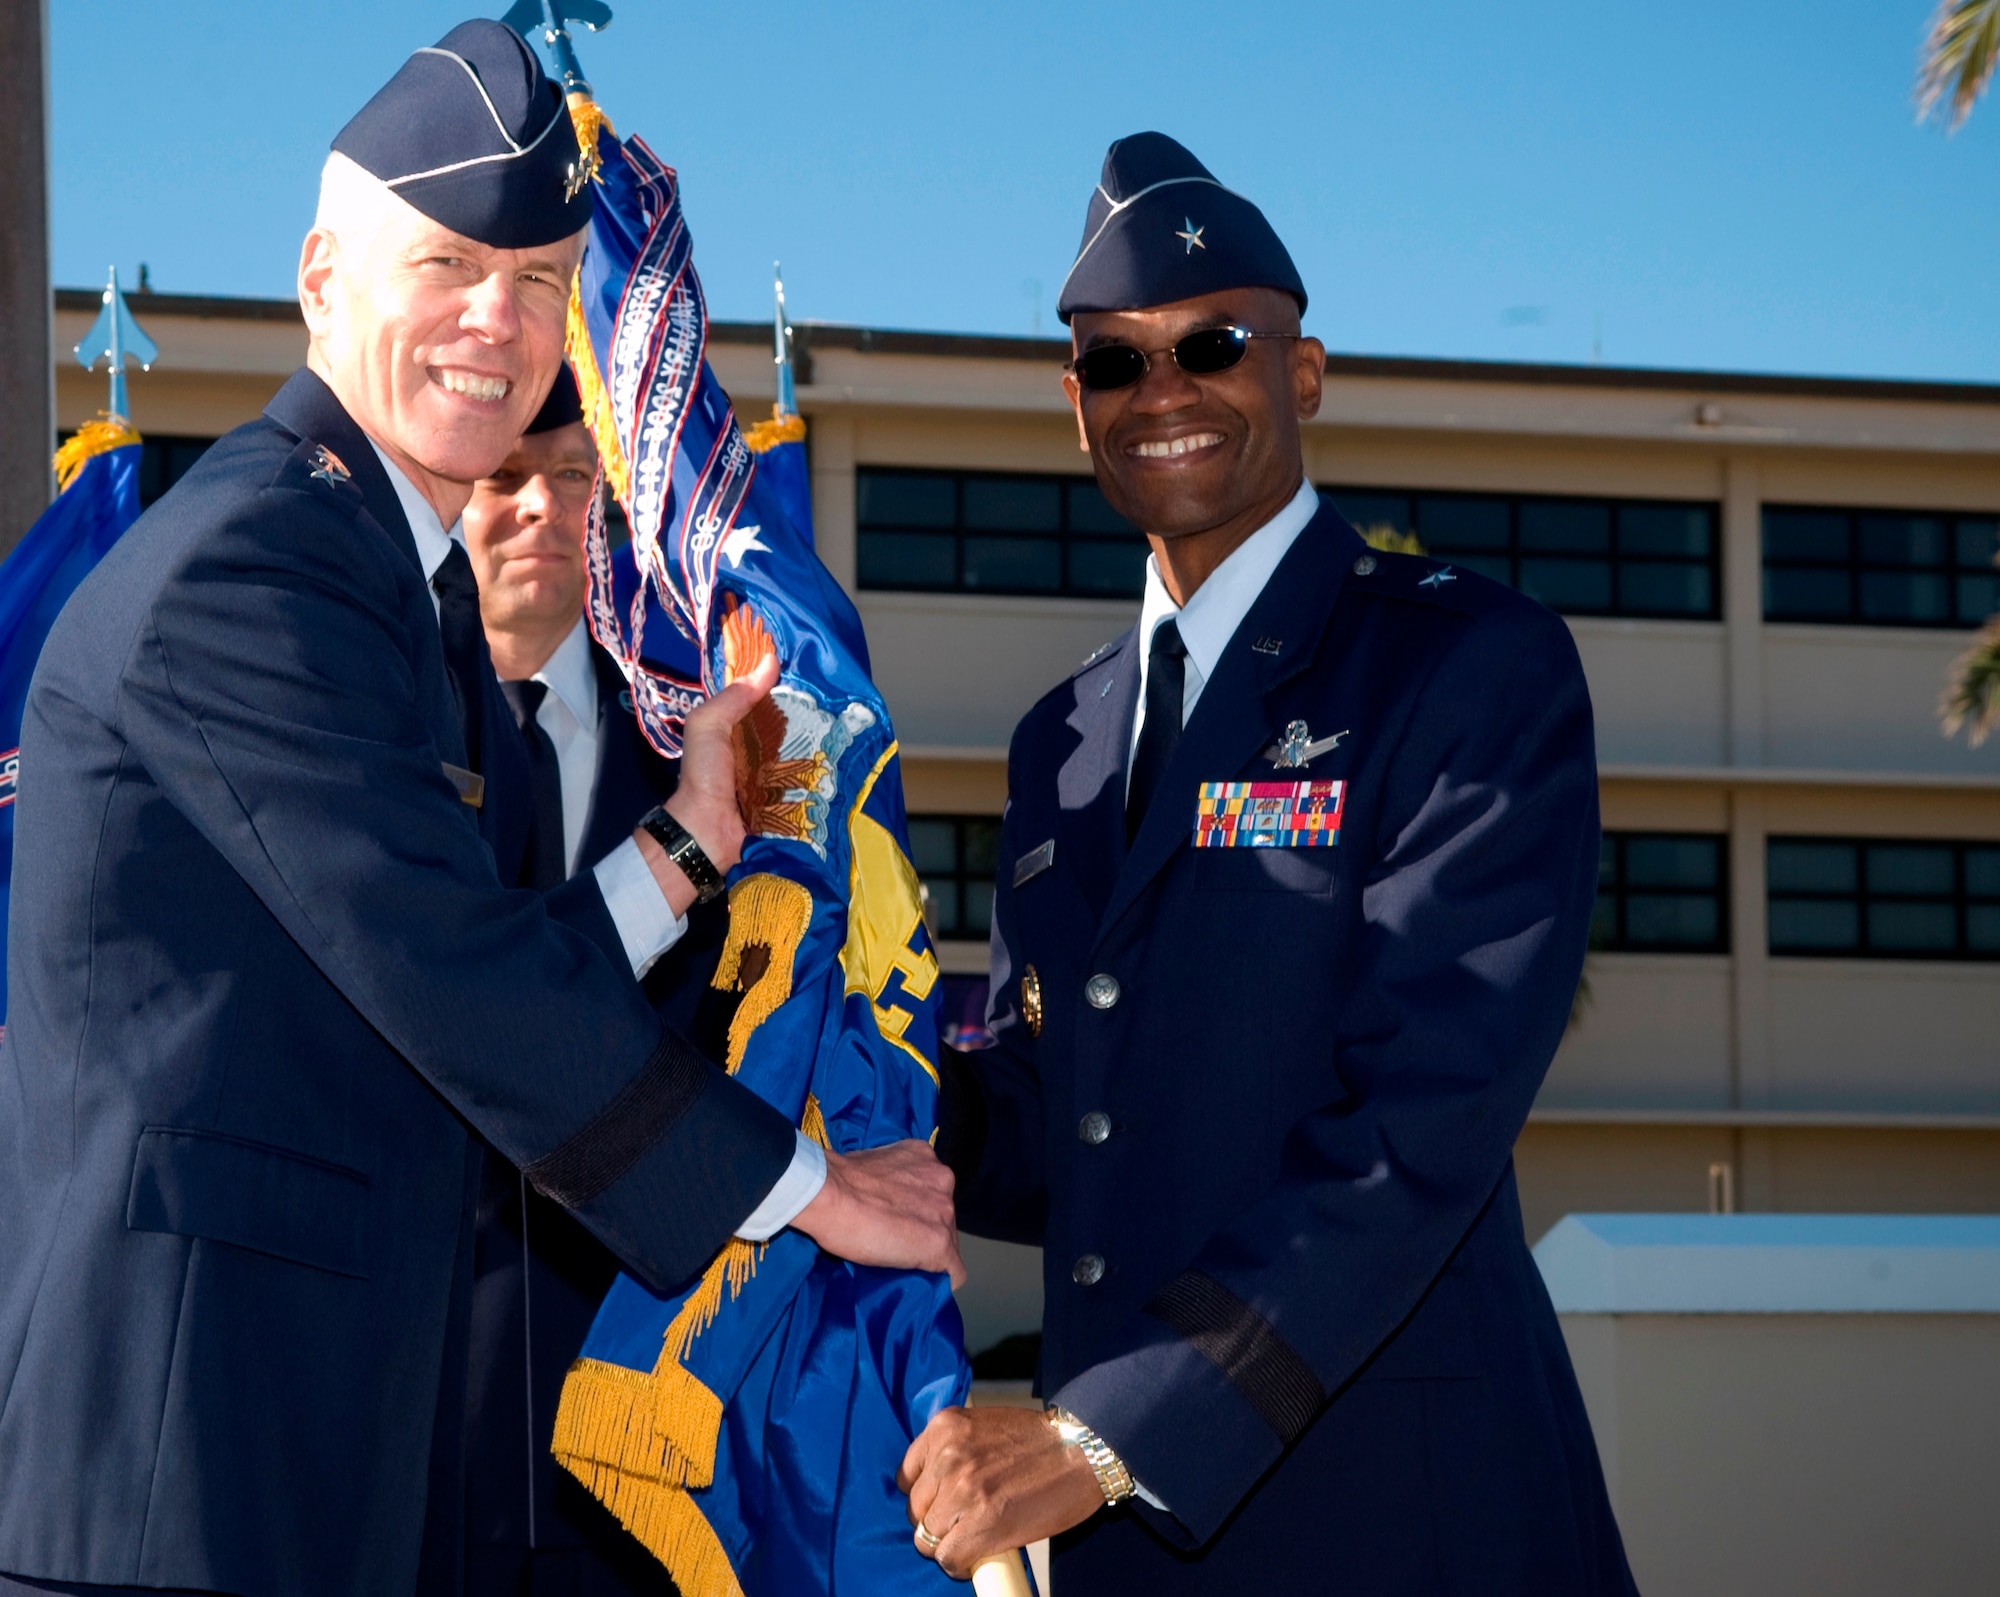 Brig. Gen. Edward L. Bolton, Jr., right, accepts the 45th Space Wing command guidon from Lt. Gen. William L. Shelton, 14th Air Force commander, during a change of command ceremony held Oct. 28 at Memorial Plaza. In between the two generals is Command Chief Master Sgt. Dennis Vannorsdall. Gen. Bolton assumed command from Brig. Gen. Susan J.  Helms. (U.S. Air Force photo by Jim Laviska)